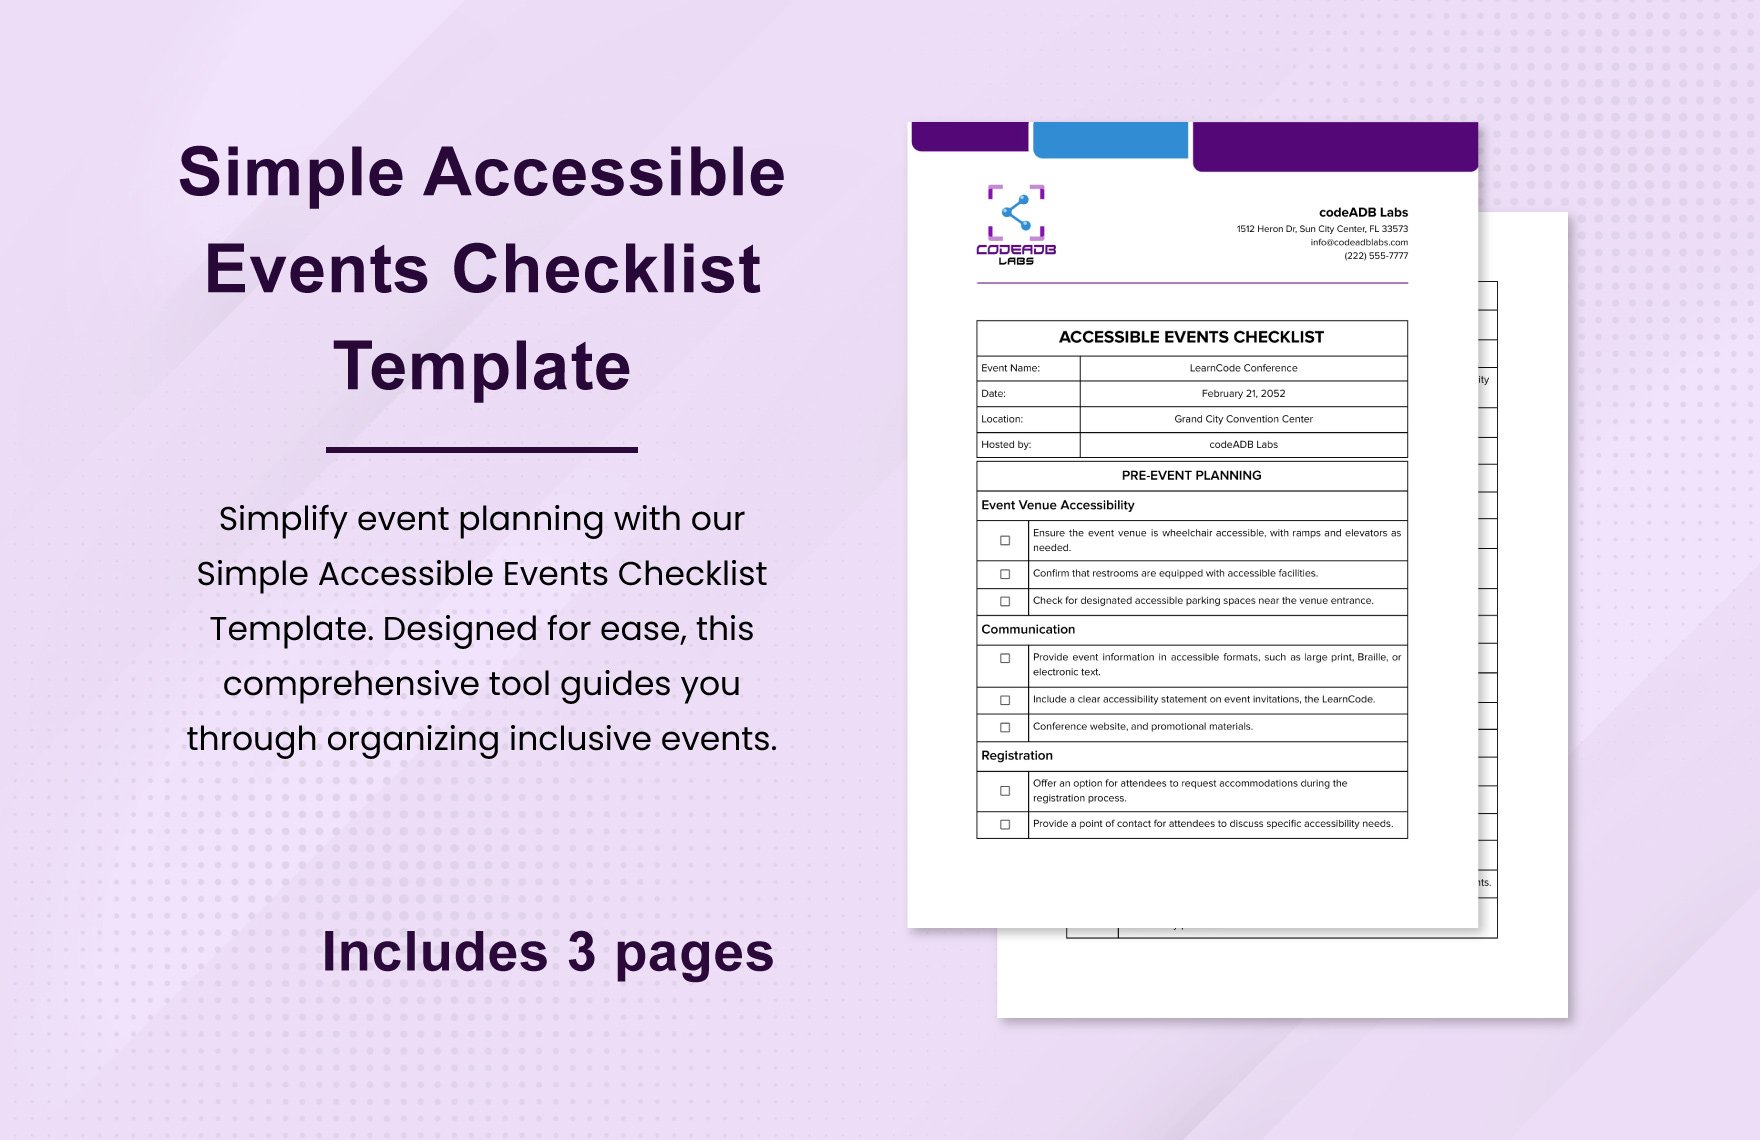 Simple Accessible Events Checklist Template